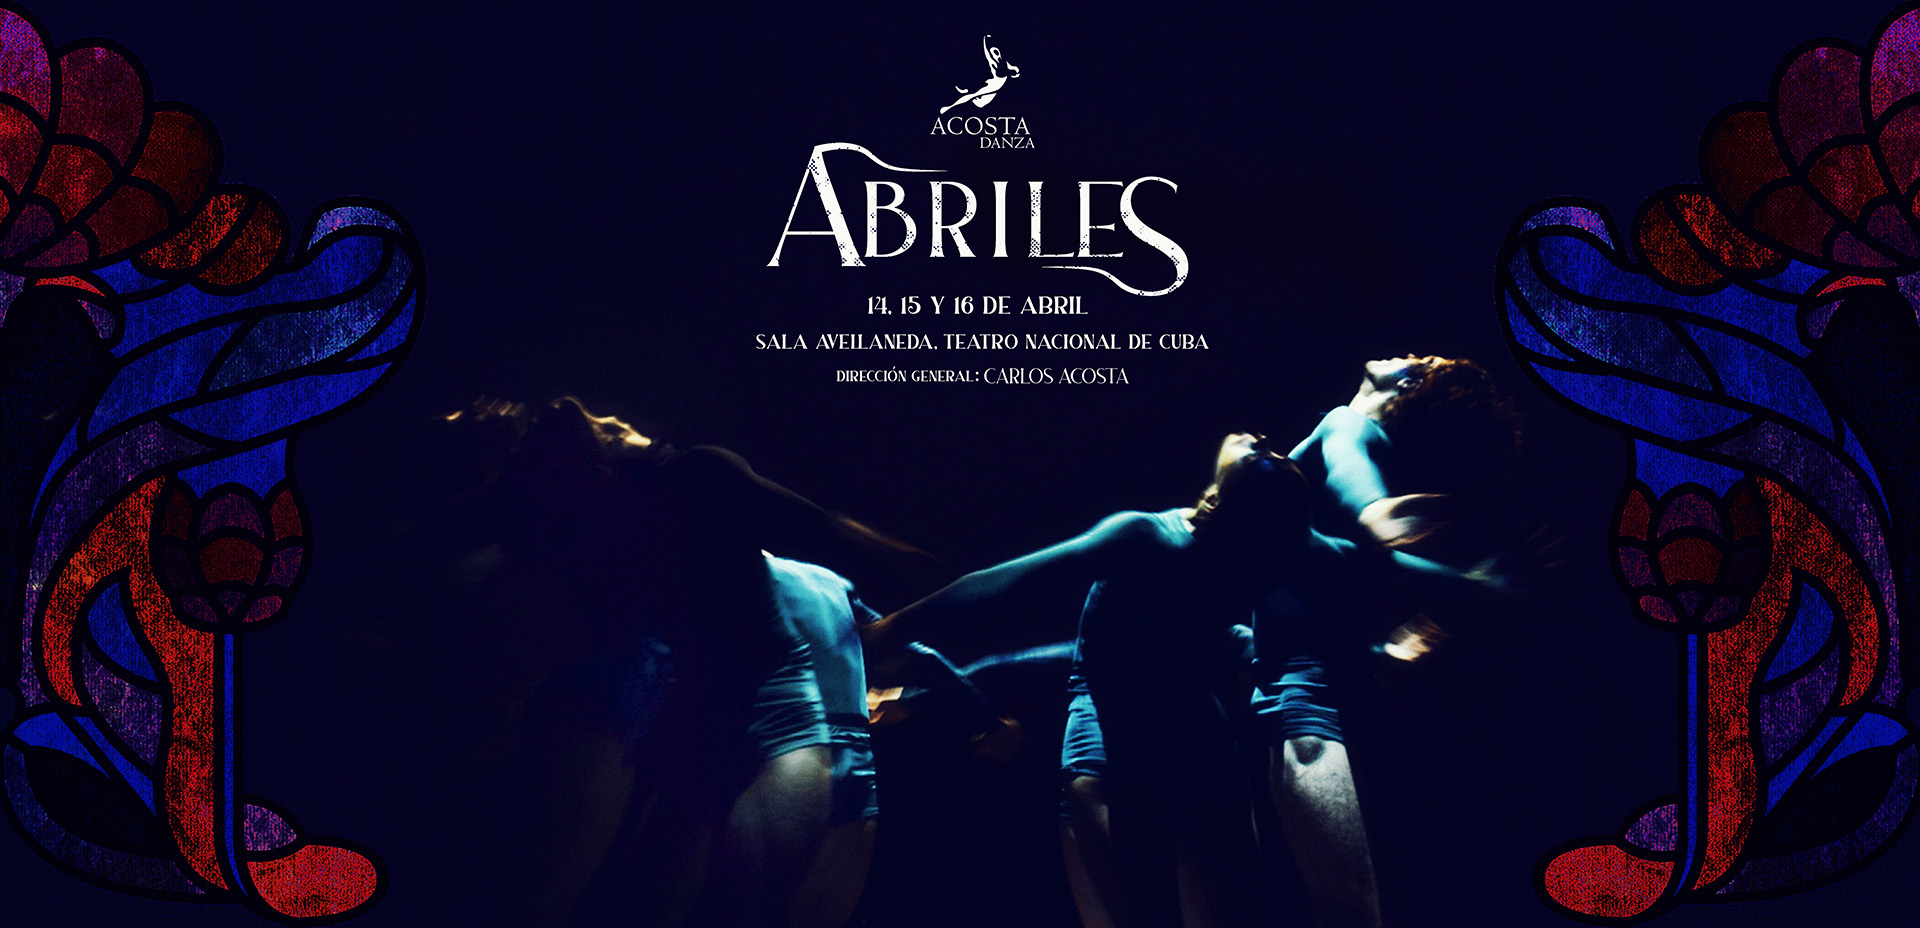 ACOSTA DANZA WILL PRESENT SHOW "ABRILES" AT THE NATIONAL THEATER